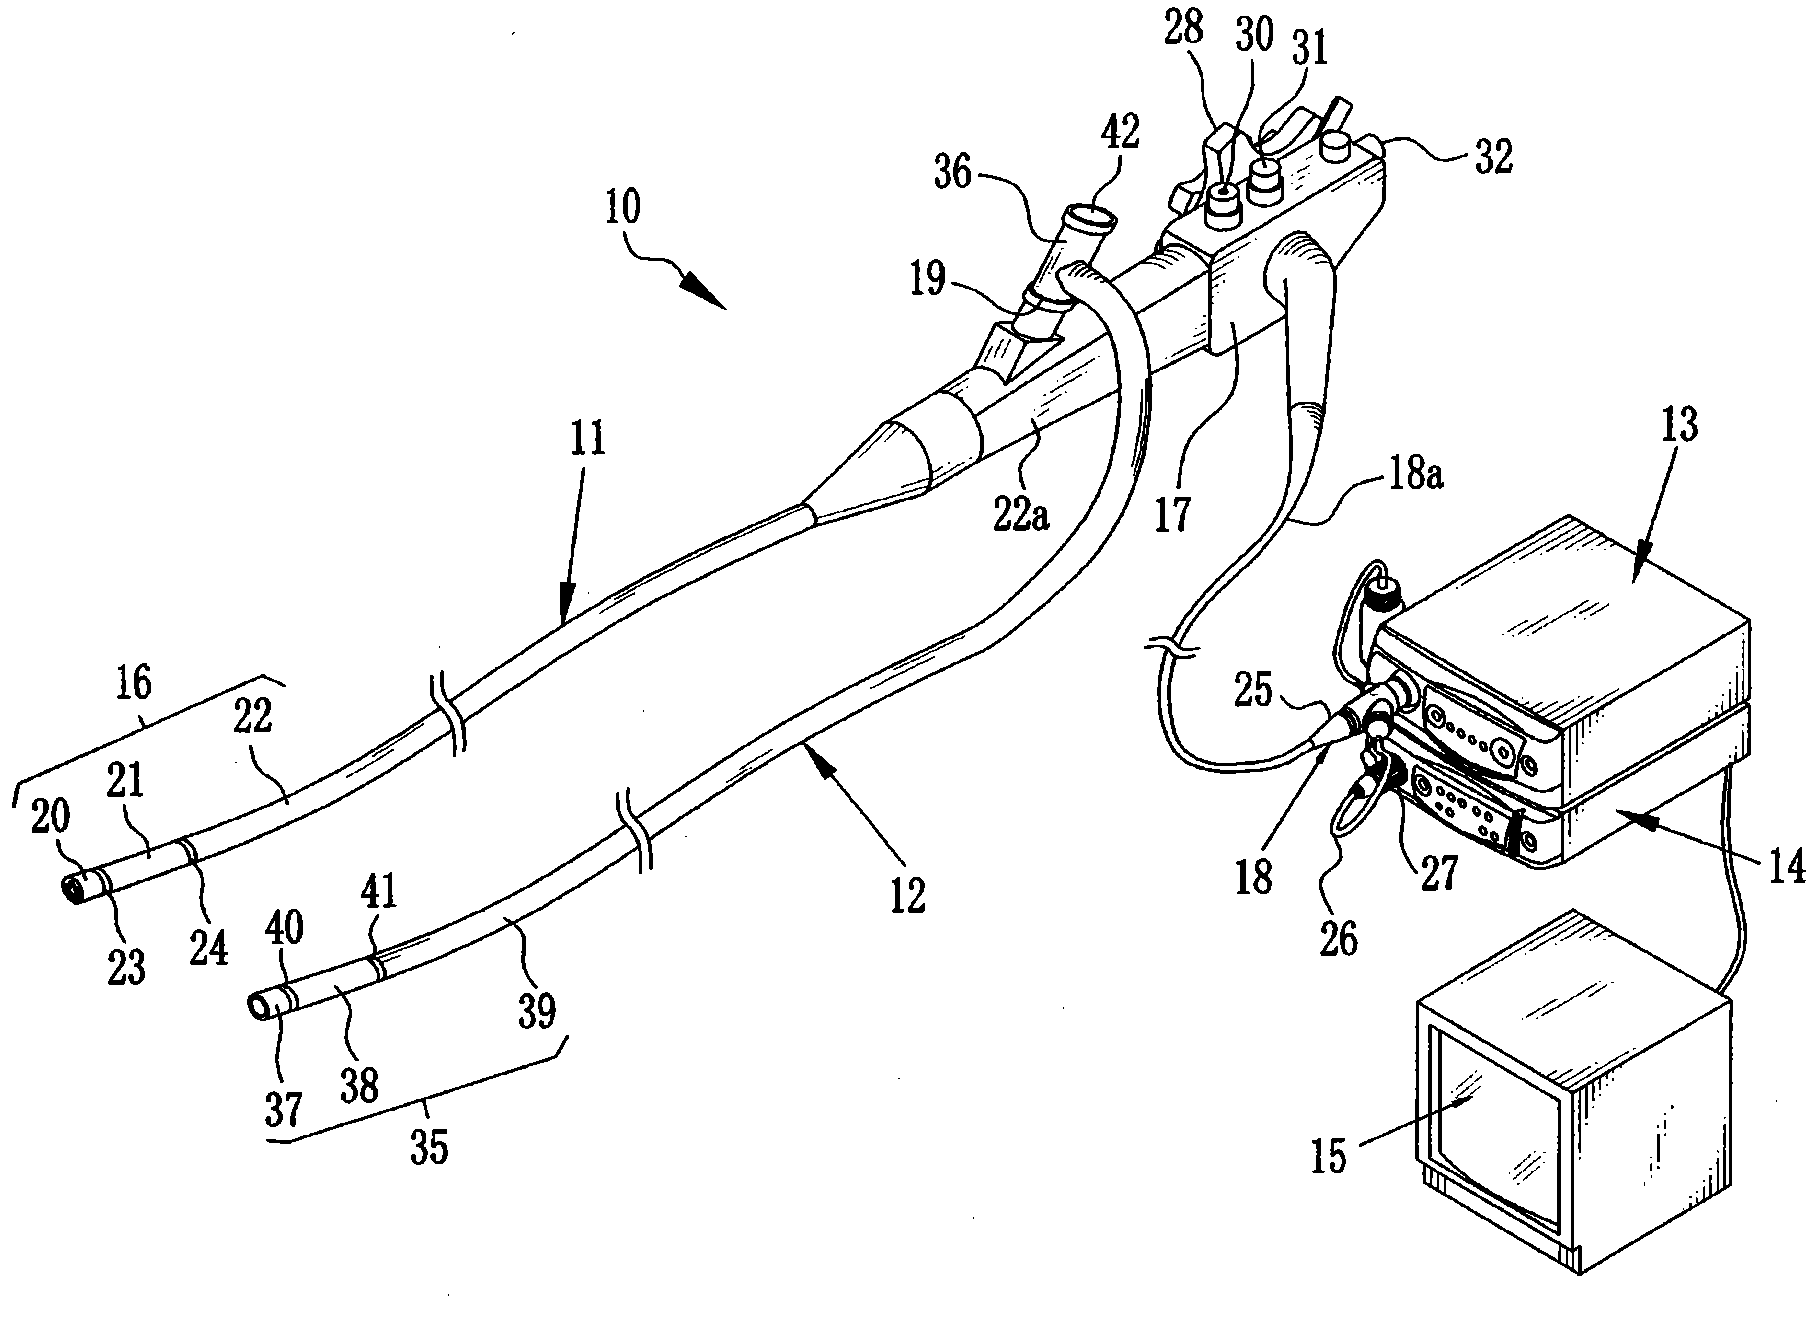 Endoscope system, method of using the same, assisting tool and adapter